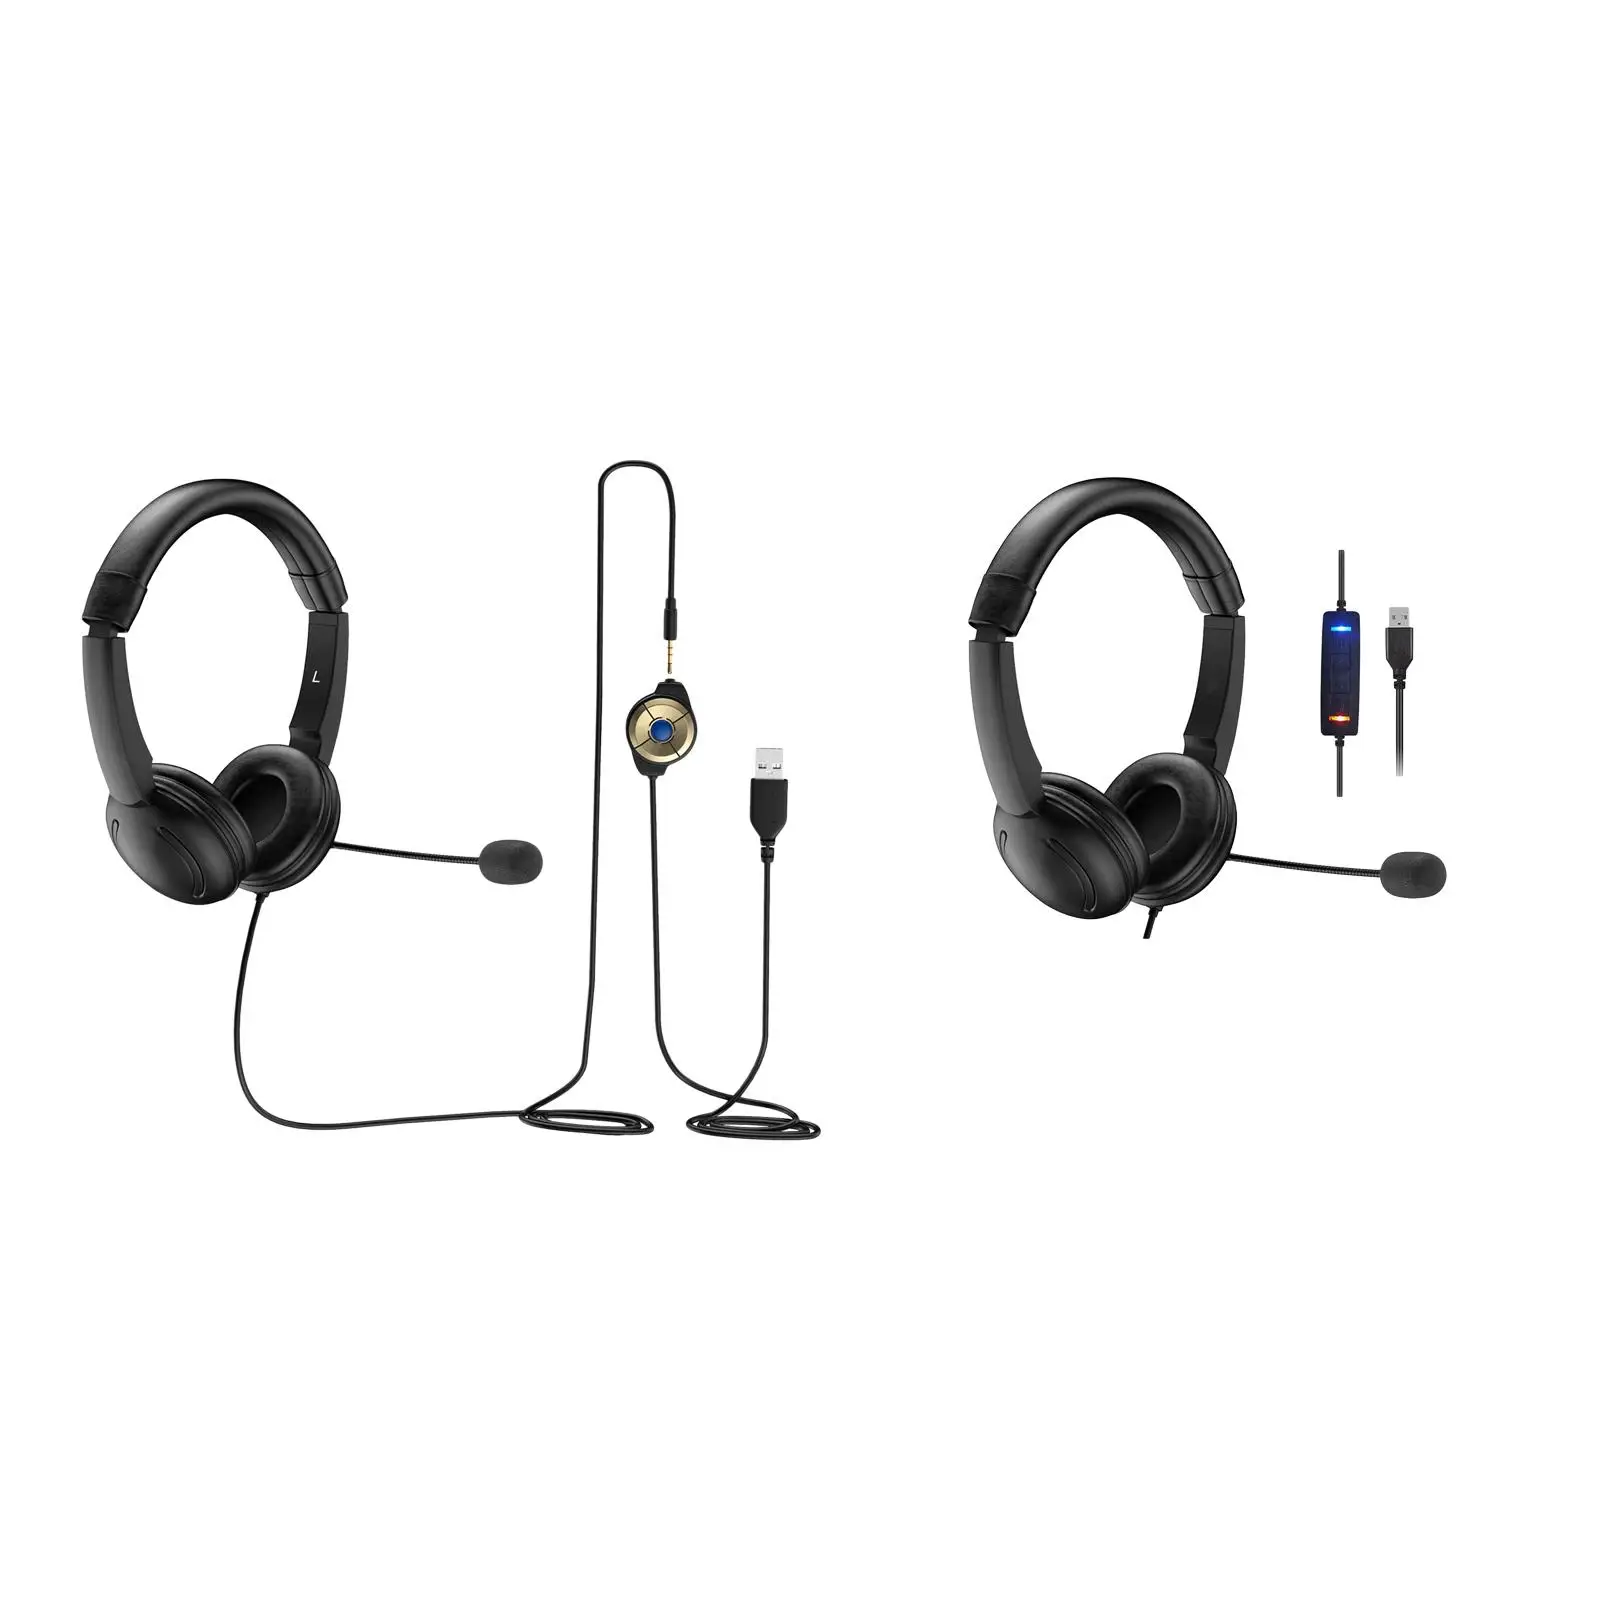 USB Headset Premium with Microphone Lightweight Comfortable Wired Call Center Headset for Laptop PC Office Video Meetings Music